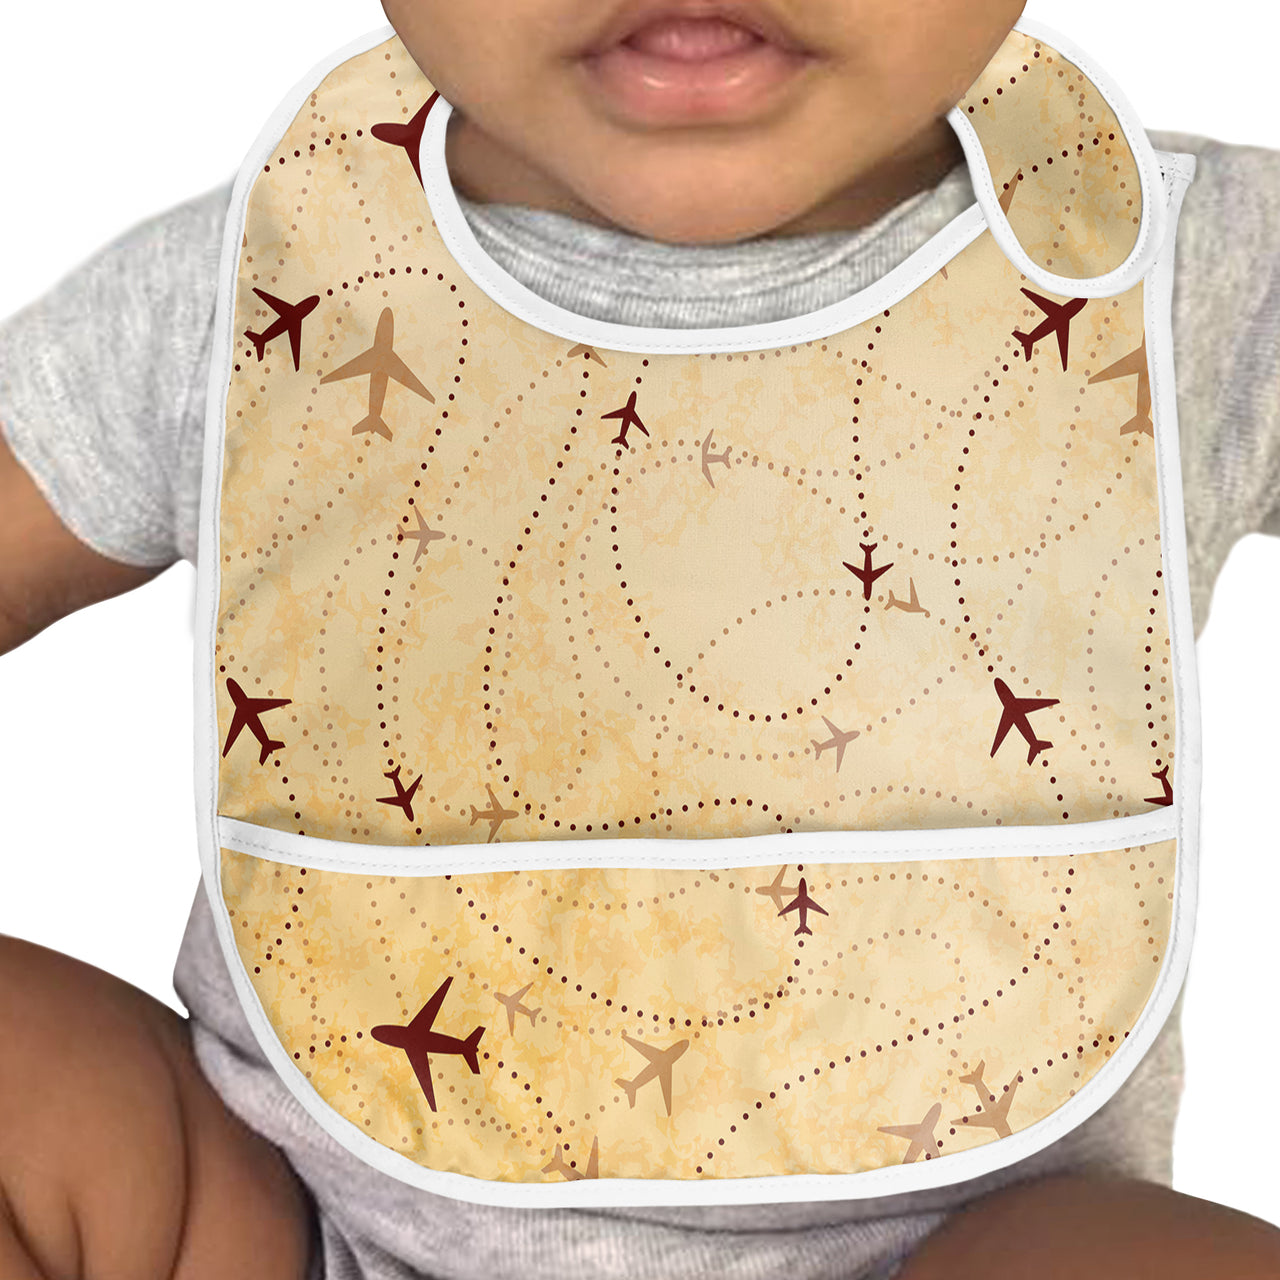 Vintage Travelling with Aircraft Designed Baby Bib